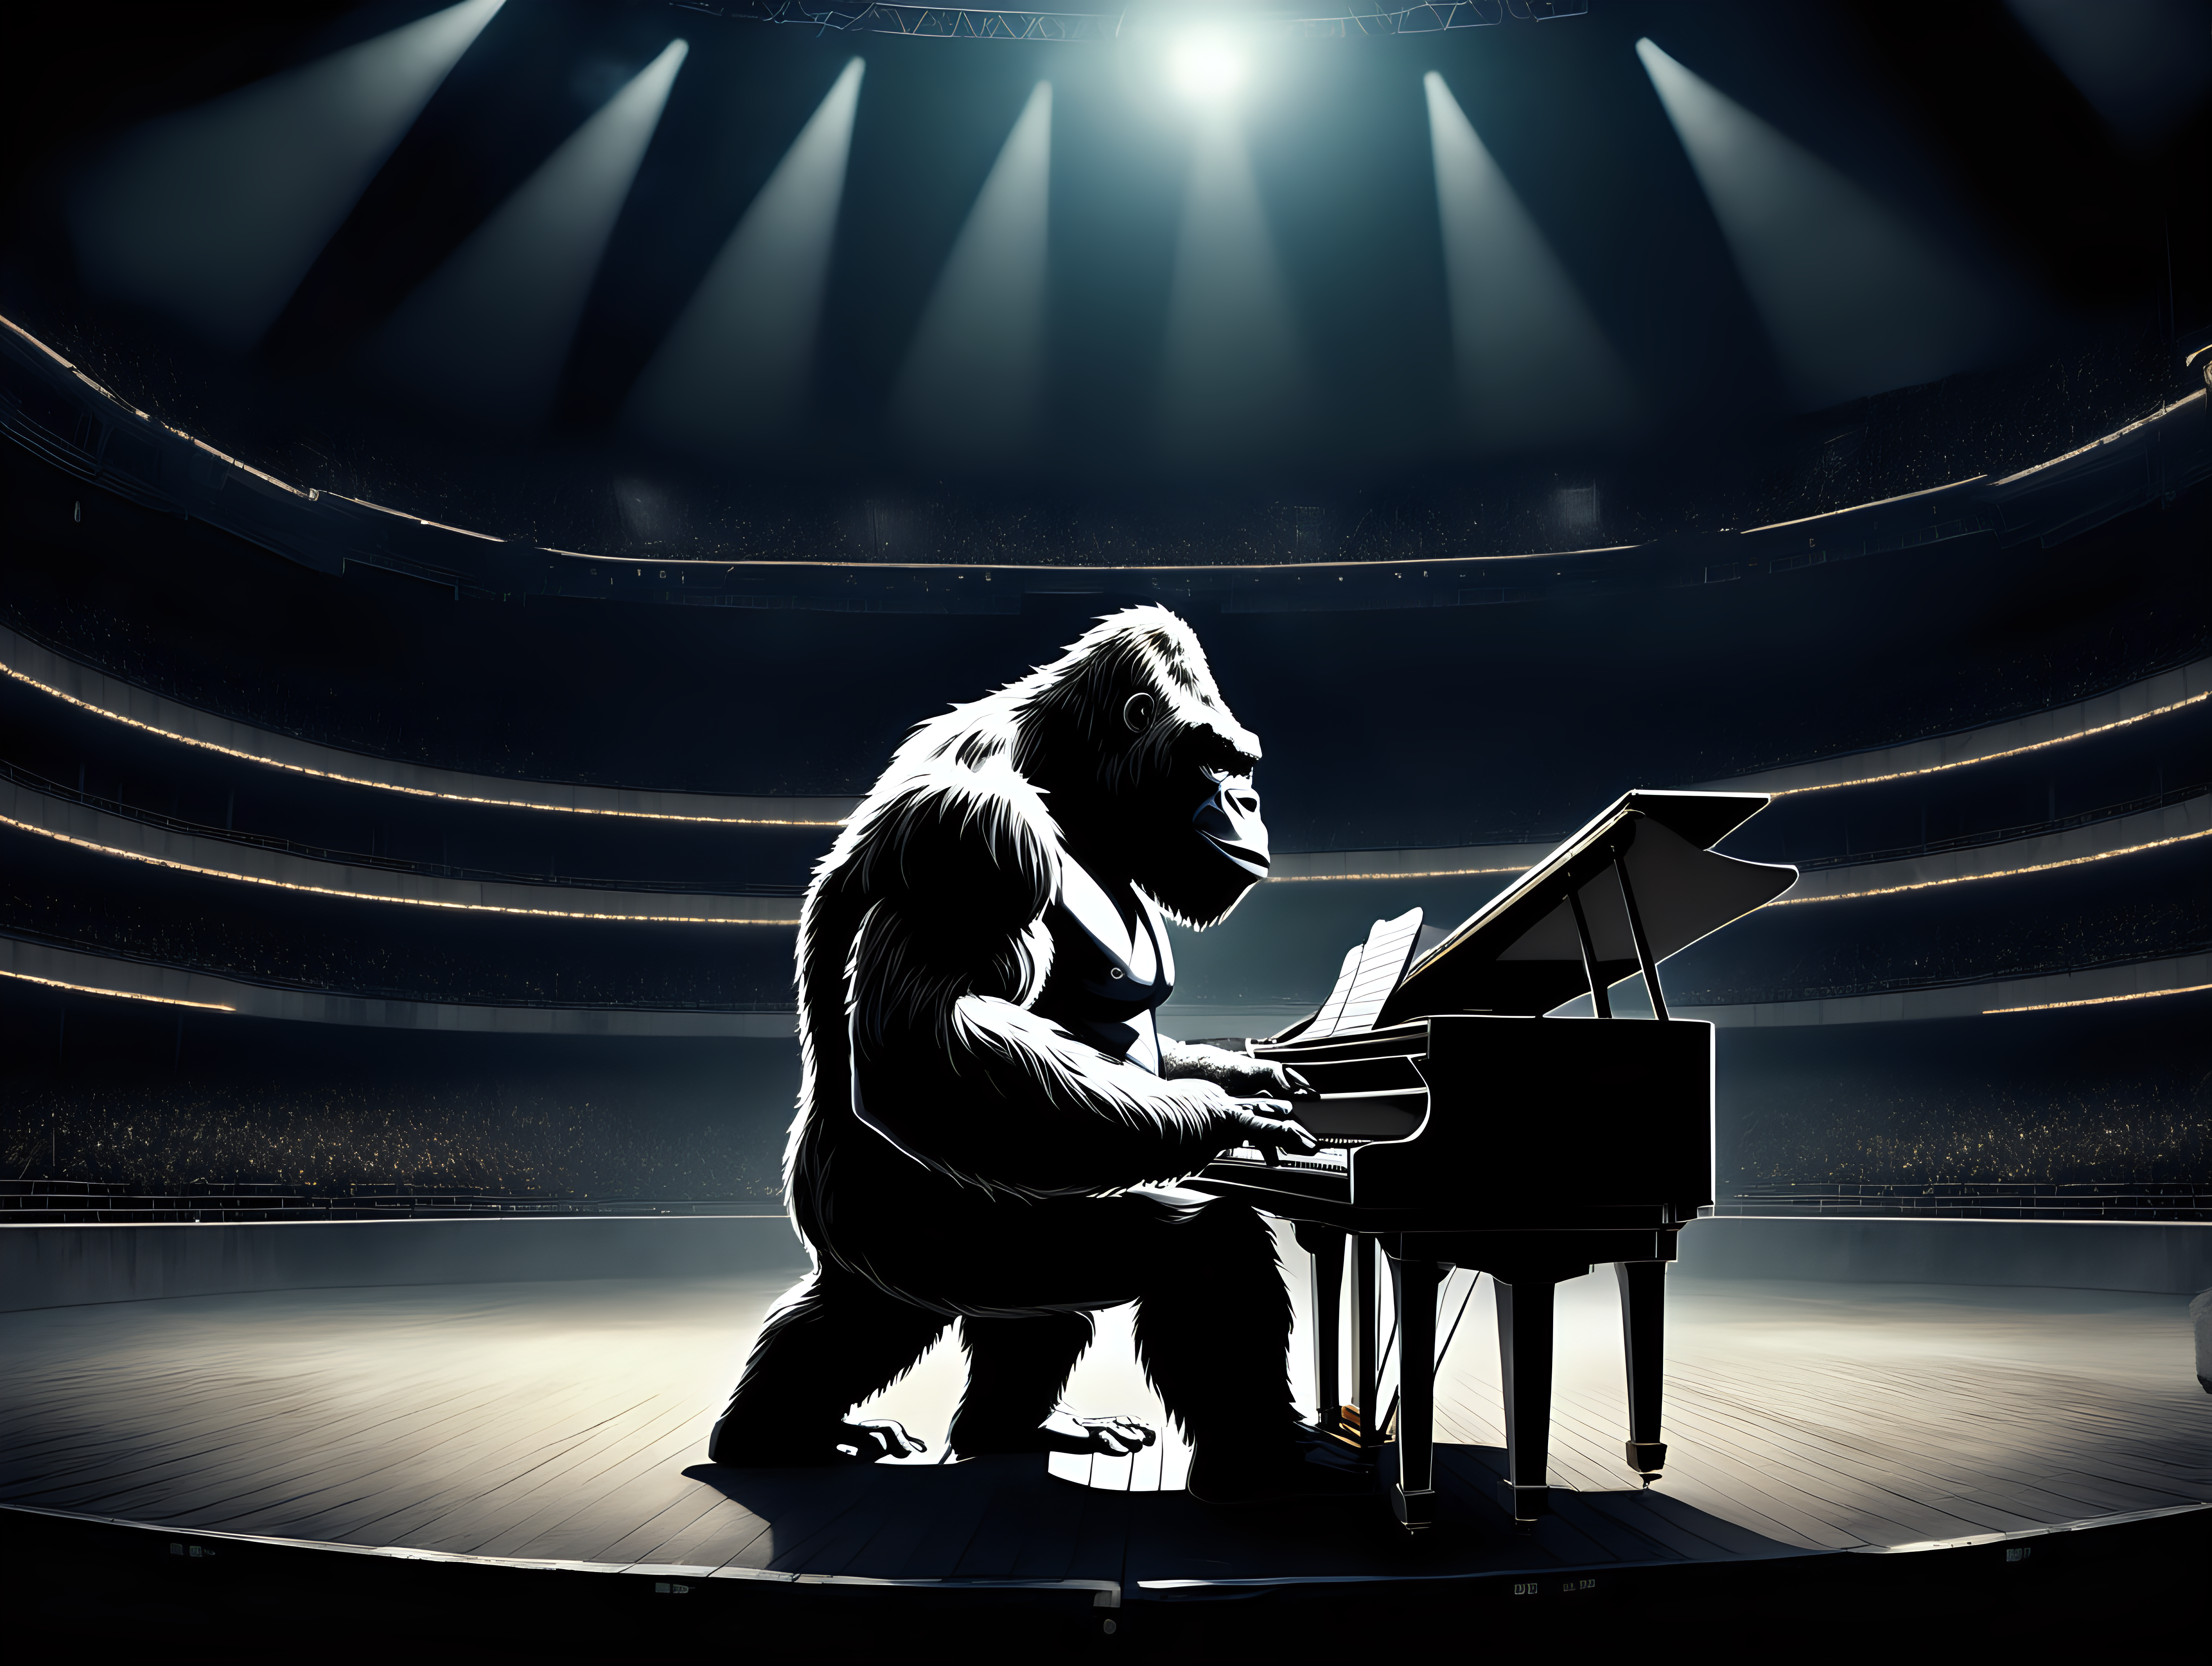 King Kong playing a piano in an arena